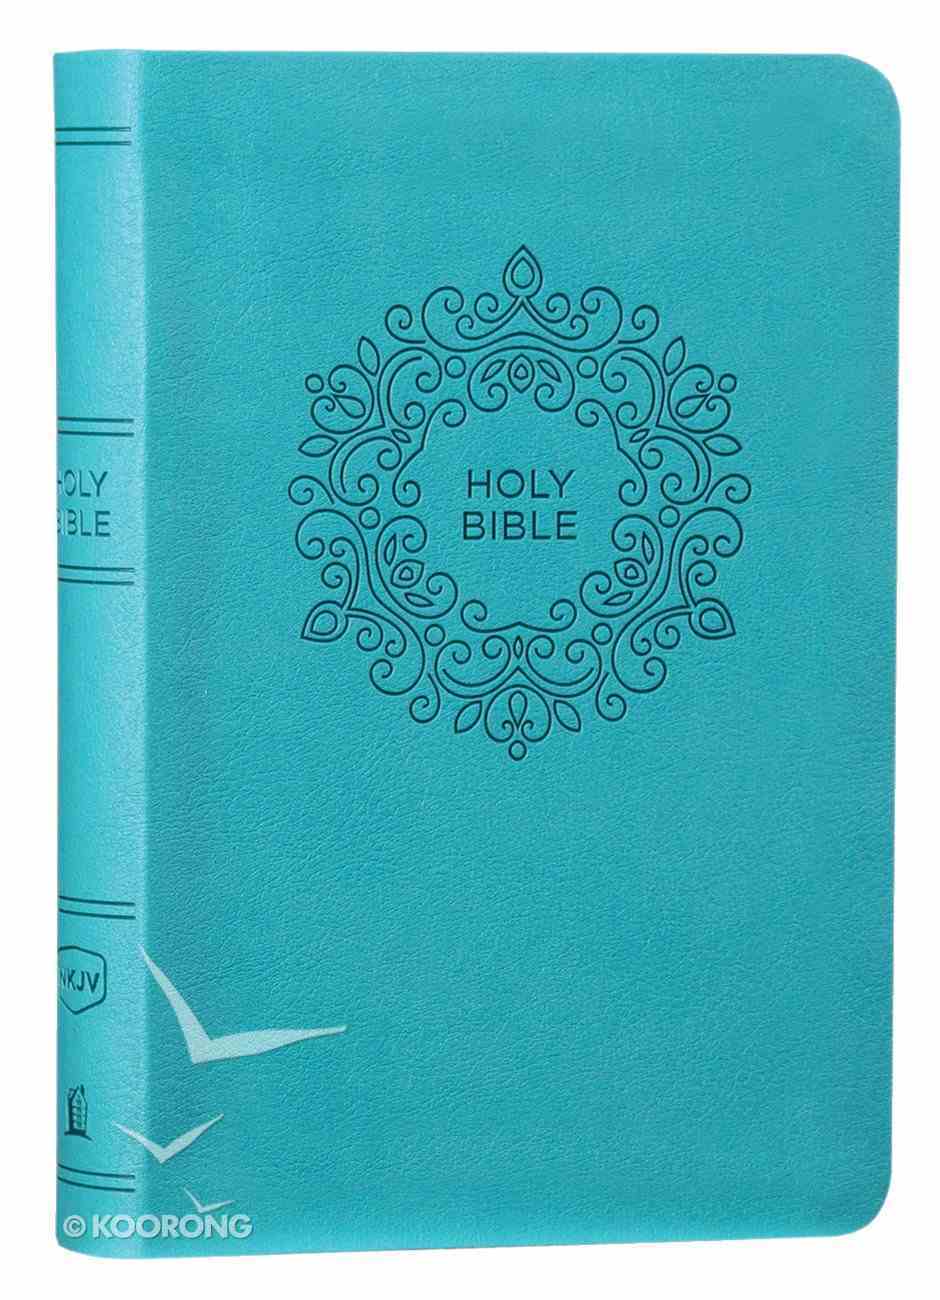 NKJV Value Thinline Bible Compact Turquoise (Red Letter Edition) Premium Imitation Leather